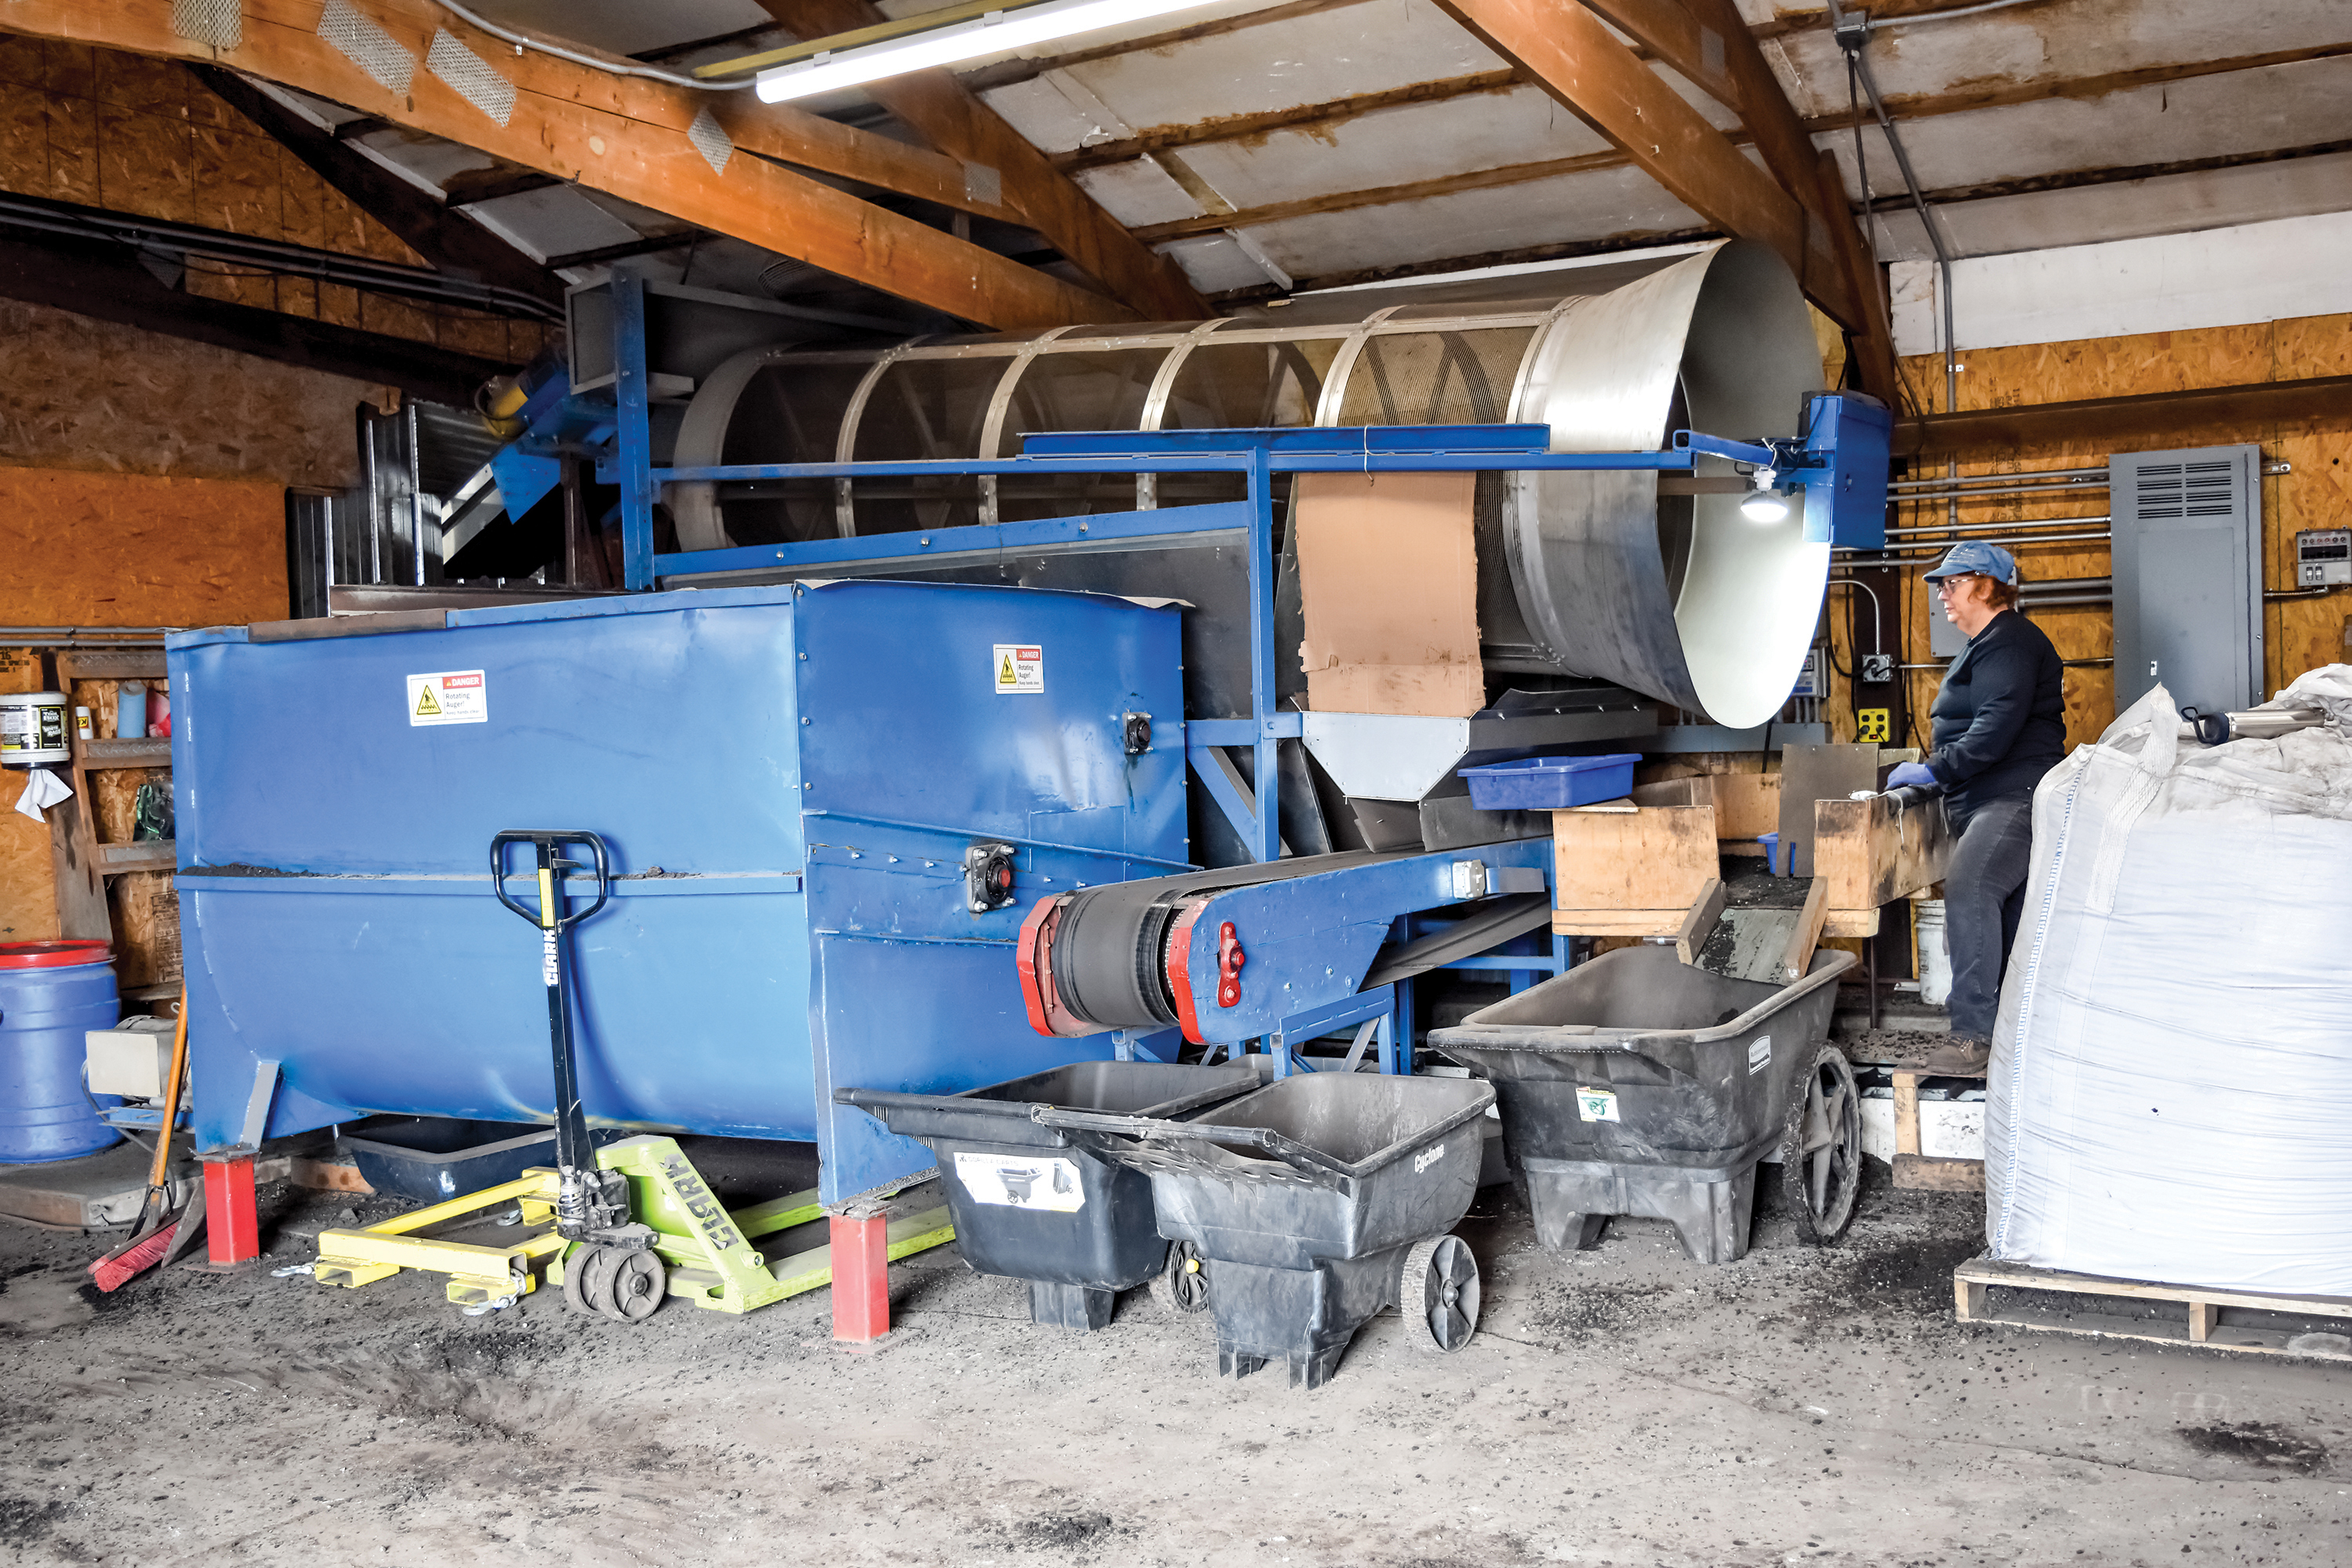 Worm bedding is mixed in a repurposed feed mixer. Worms travel through the large bell where a series of screens separates thecastings from the undigested worm bedding.